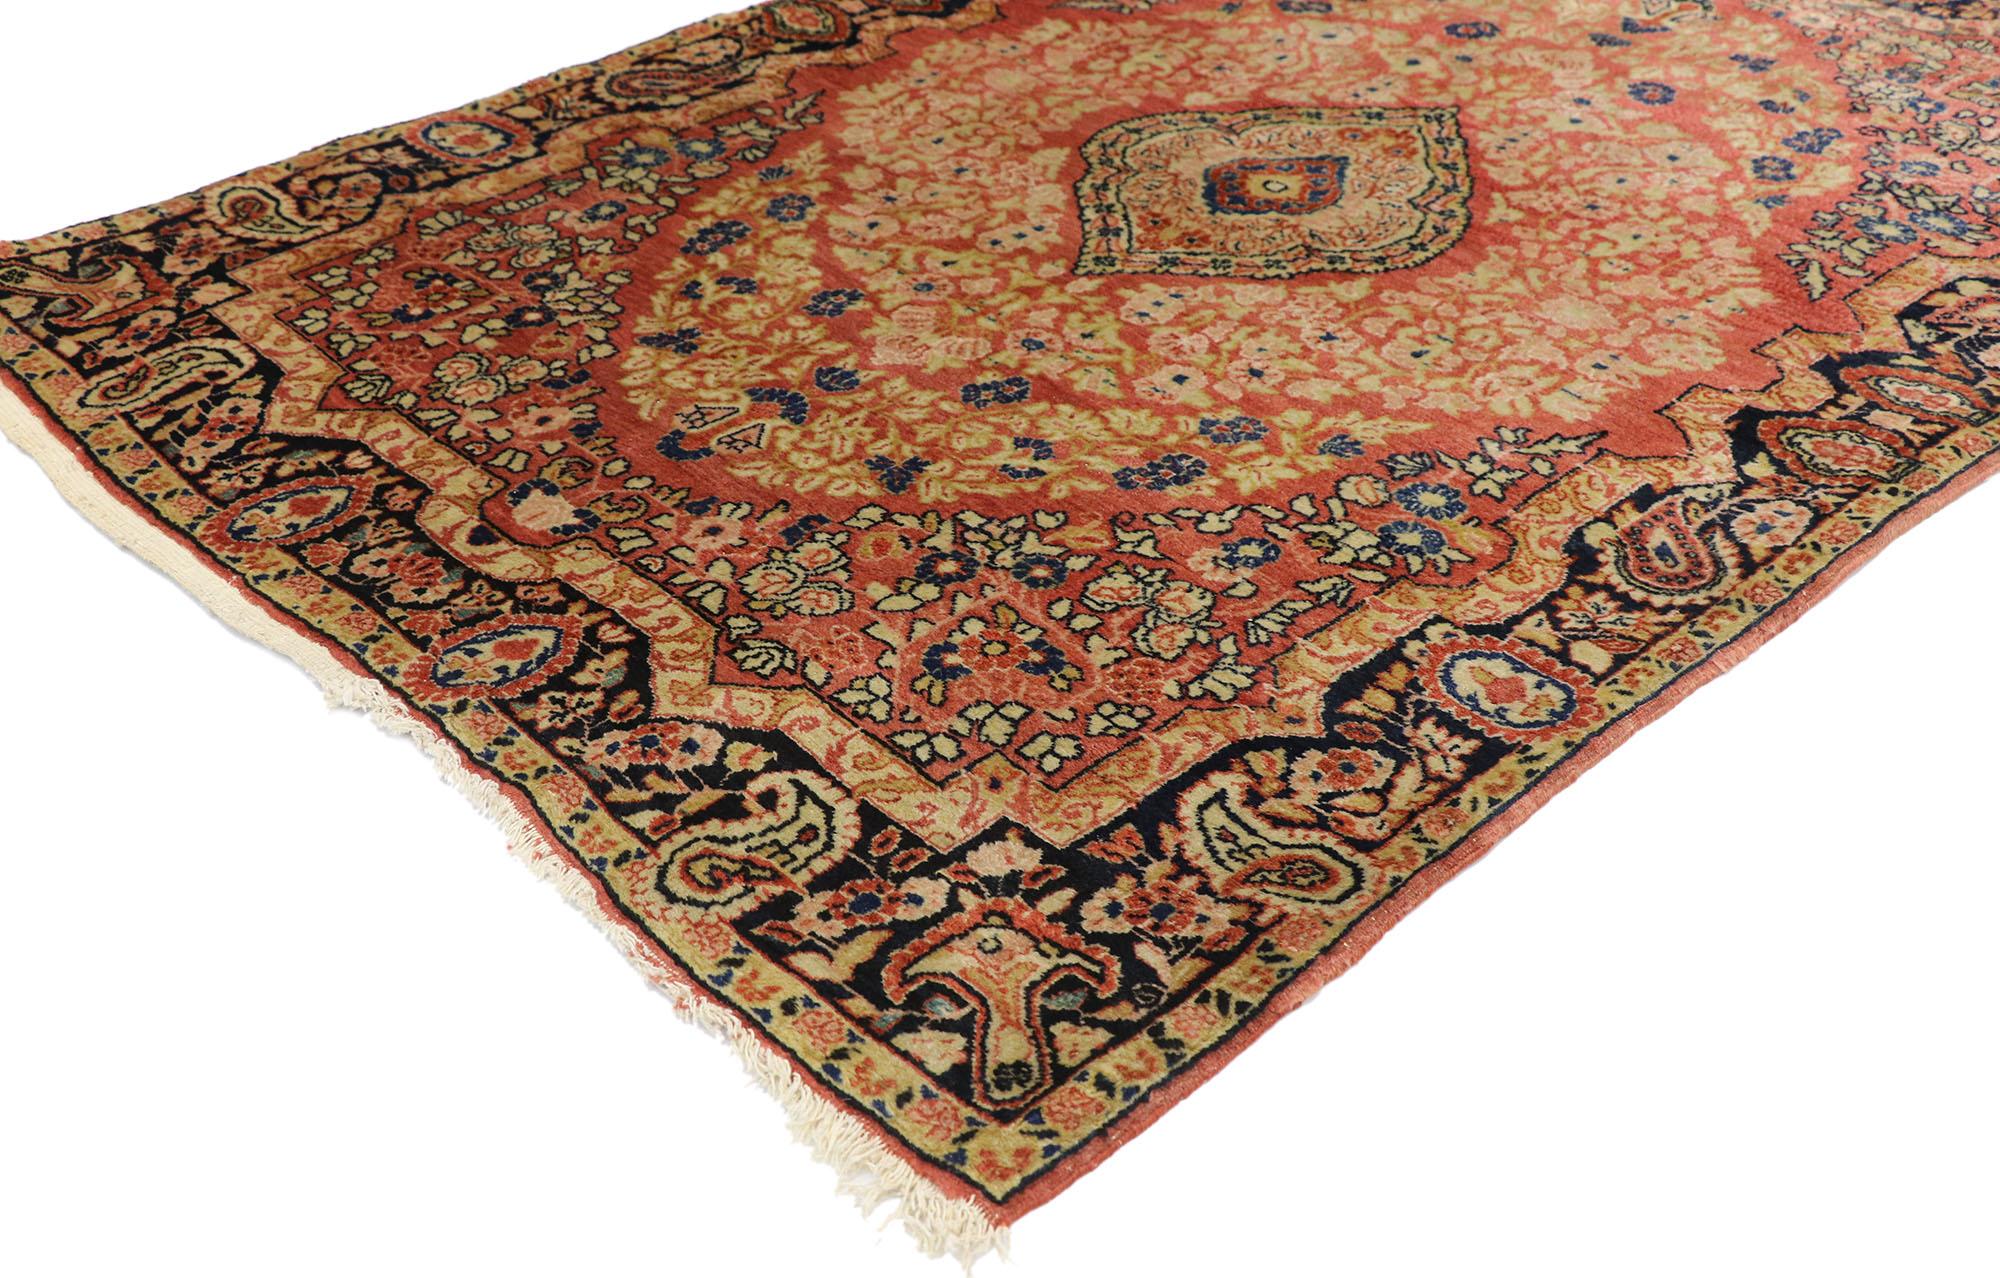 77598 vintage Persian Mahal rug with rustic Romantic Traditional style. Traditional style and rustic sensibility with romantic connotations, this hand-knotted wool vintage Persian Mahal rug is a vision of woven beauty. The abrashed rusty rose